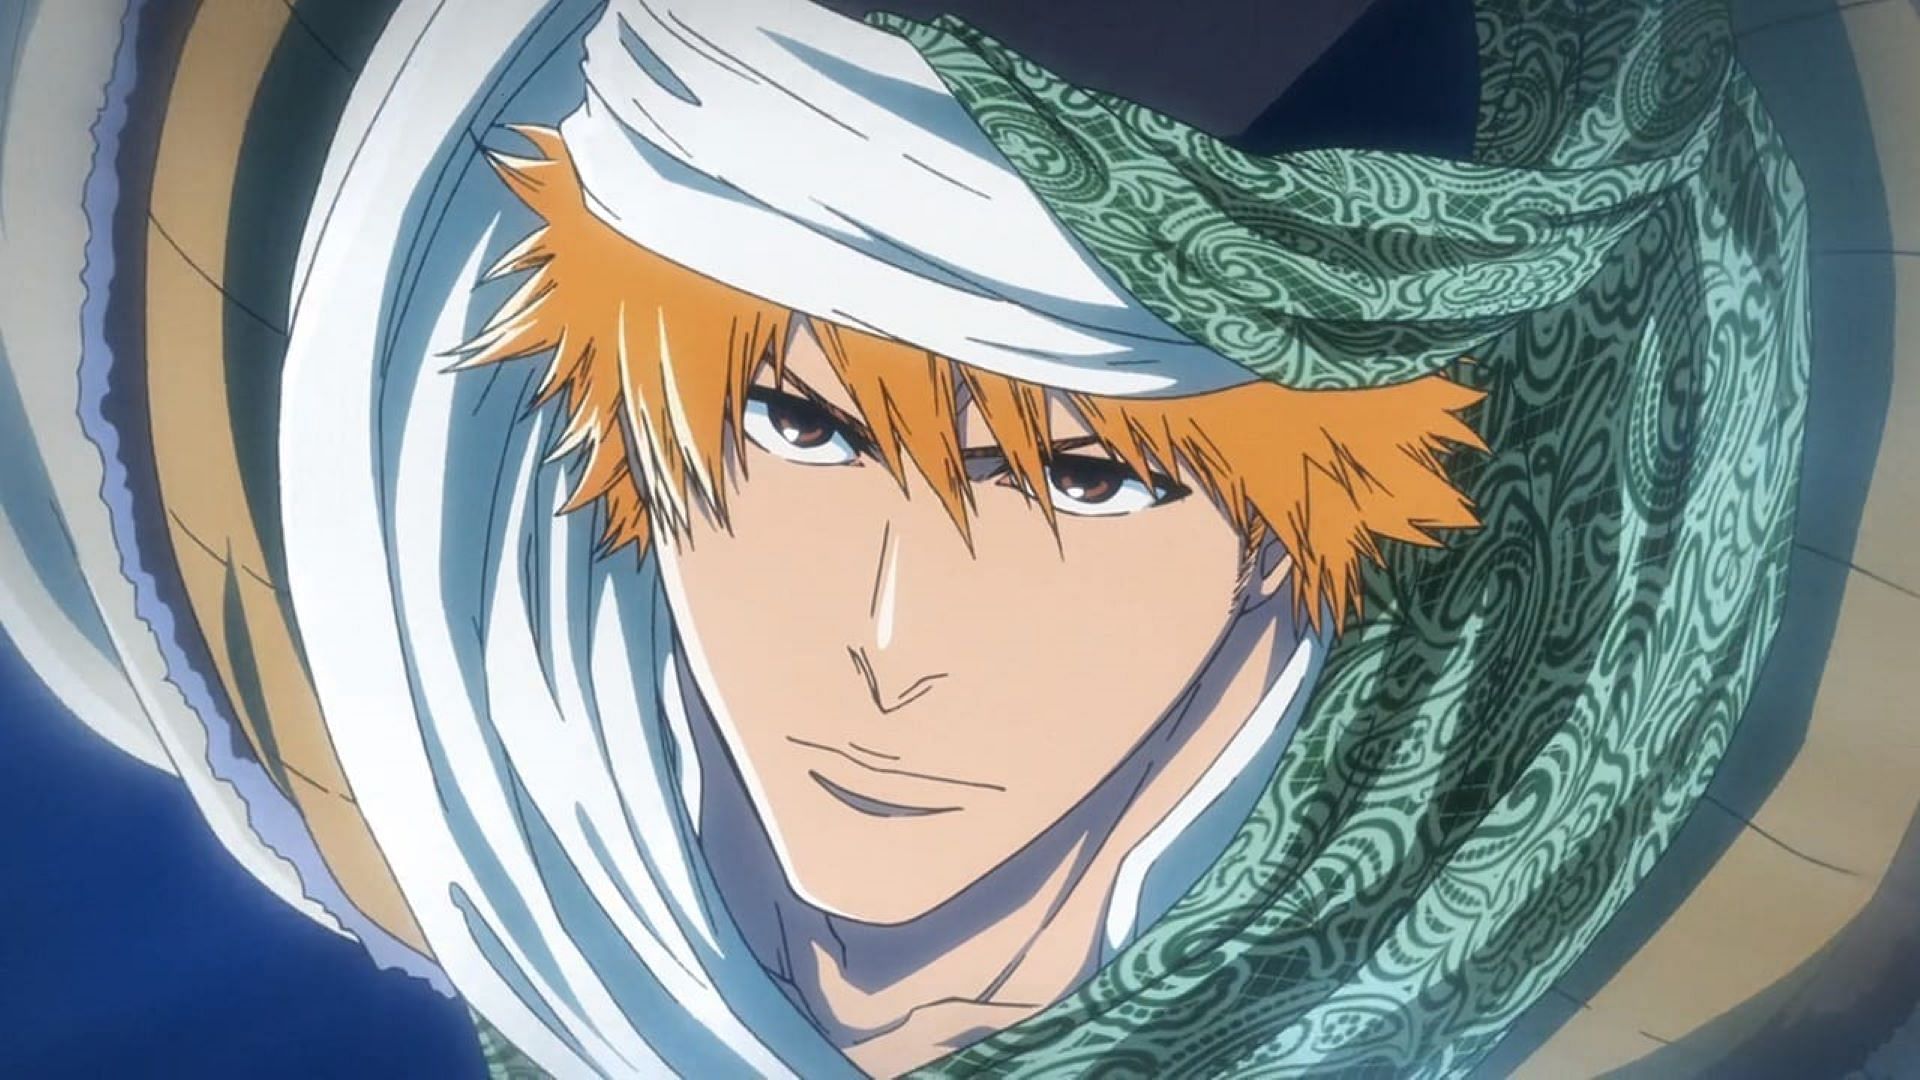 BLEACH: TYBW Part 3 Anime Reveals First Trailer and Visual, 2024